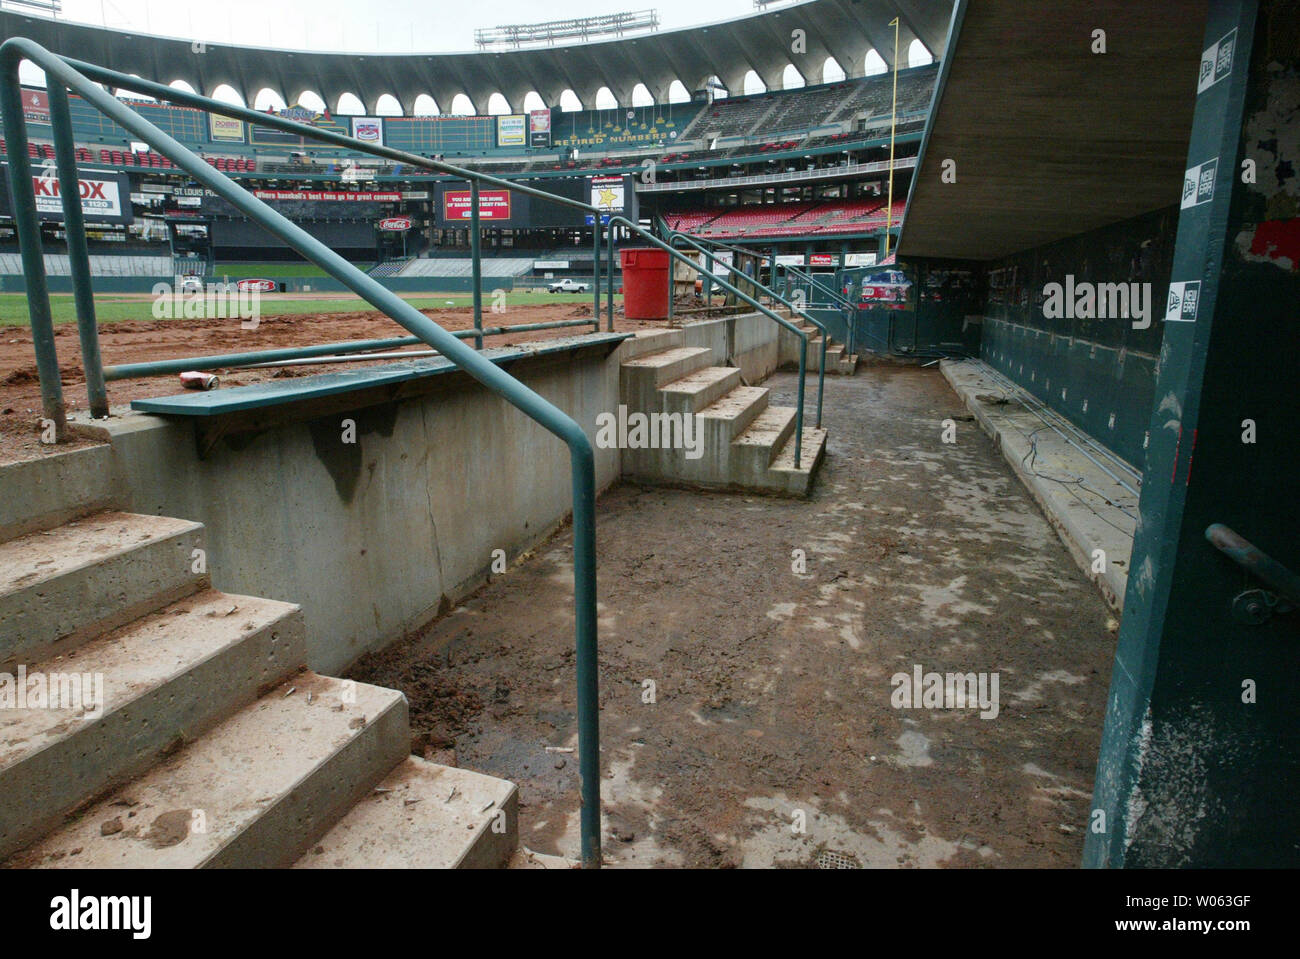 As demolition of Busch Stadium gets into full swing, the St. Louis Cardinals dugout has been stripped of its benches in St. Louis on October 21, 2005. Busch Stadium is being torn down after 40 years to make for a new Busch Stadium next door. (UPI Photo/Bill Greenblatt) Stock Photo